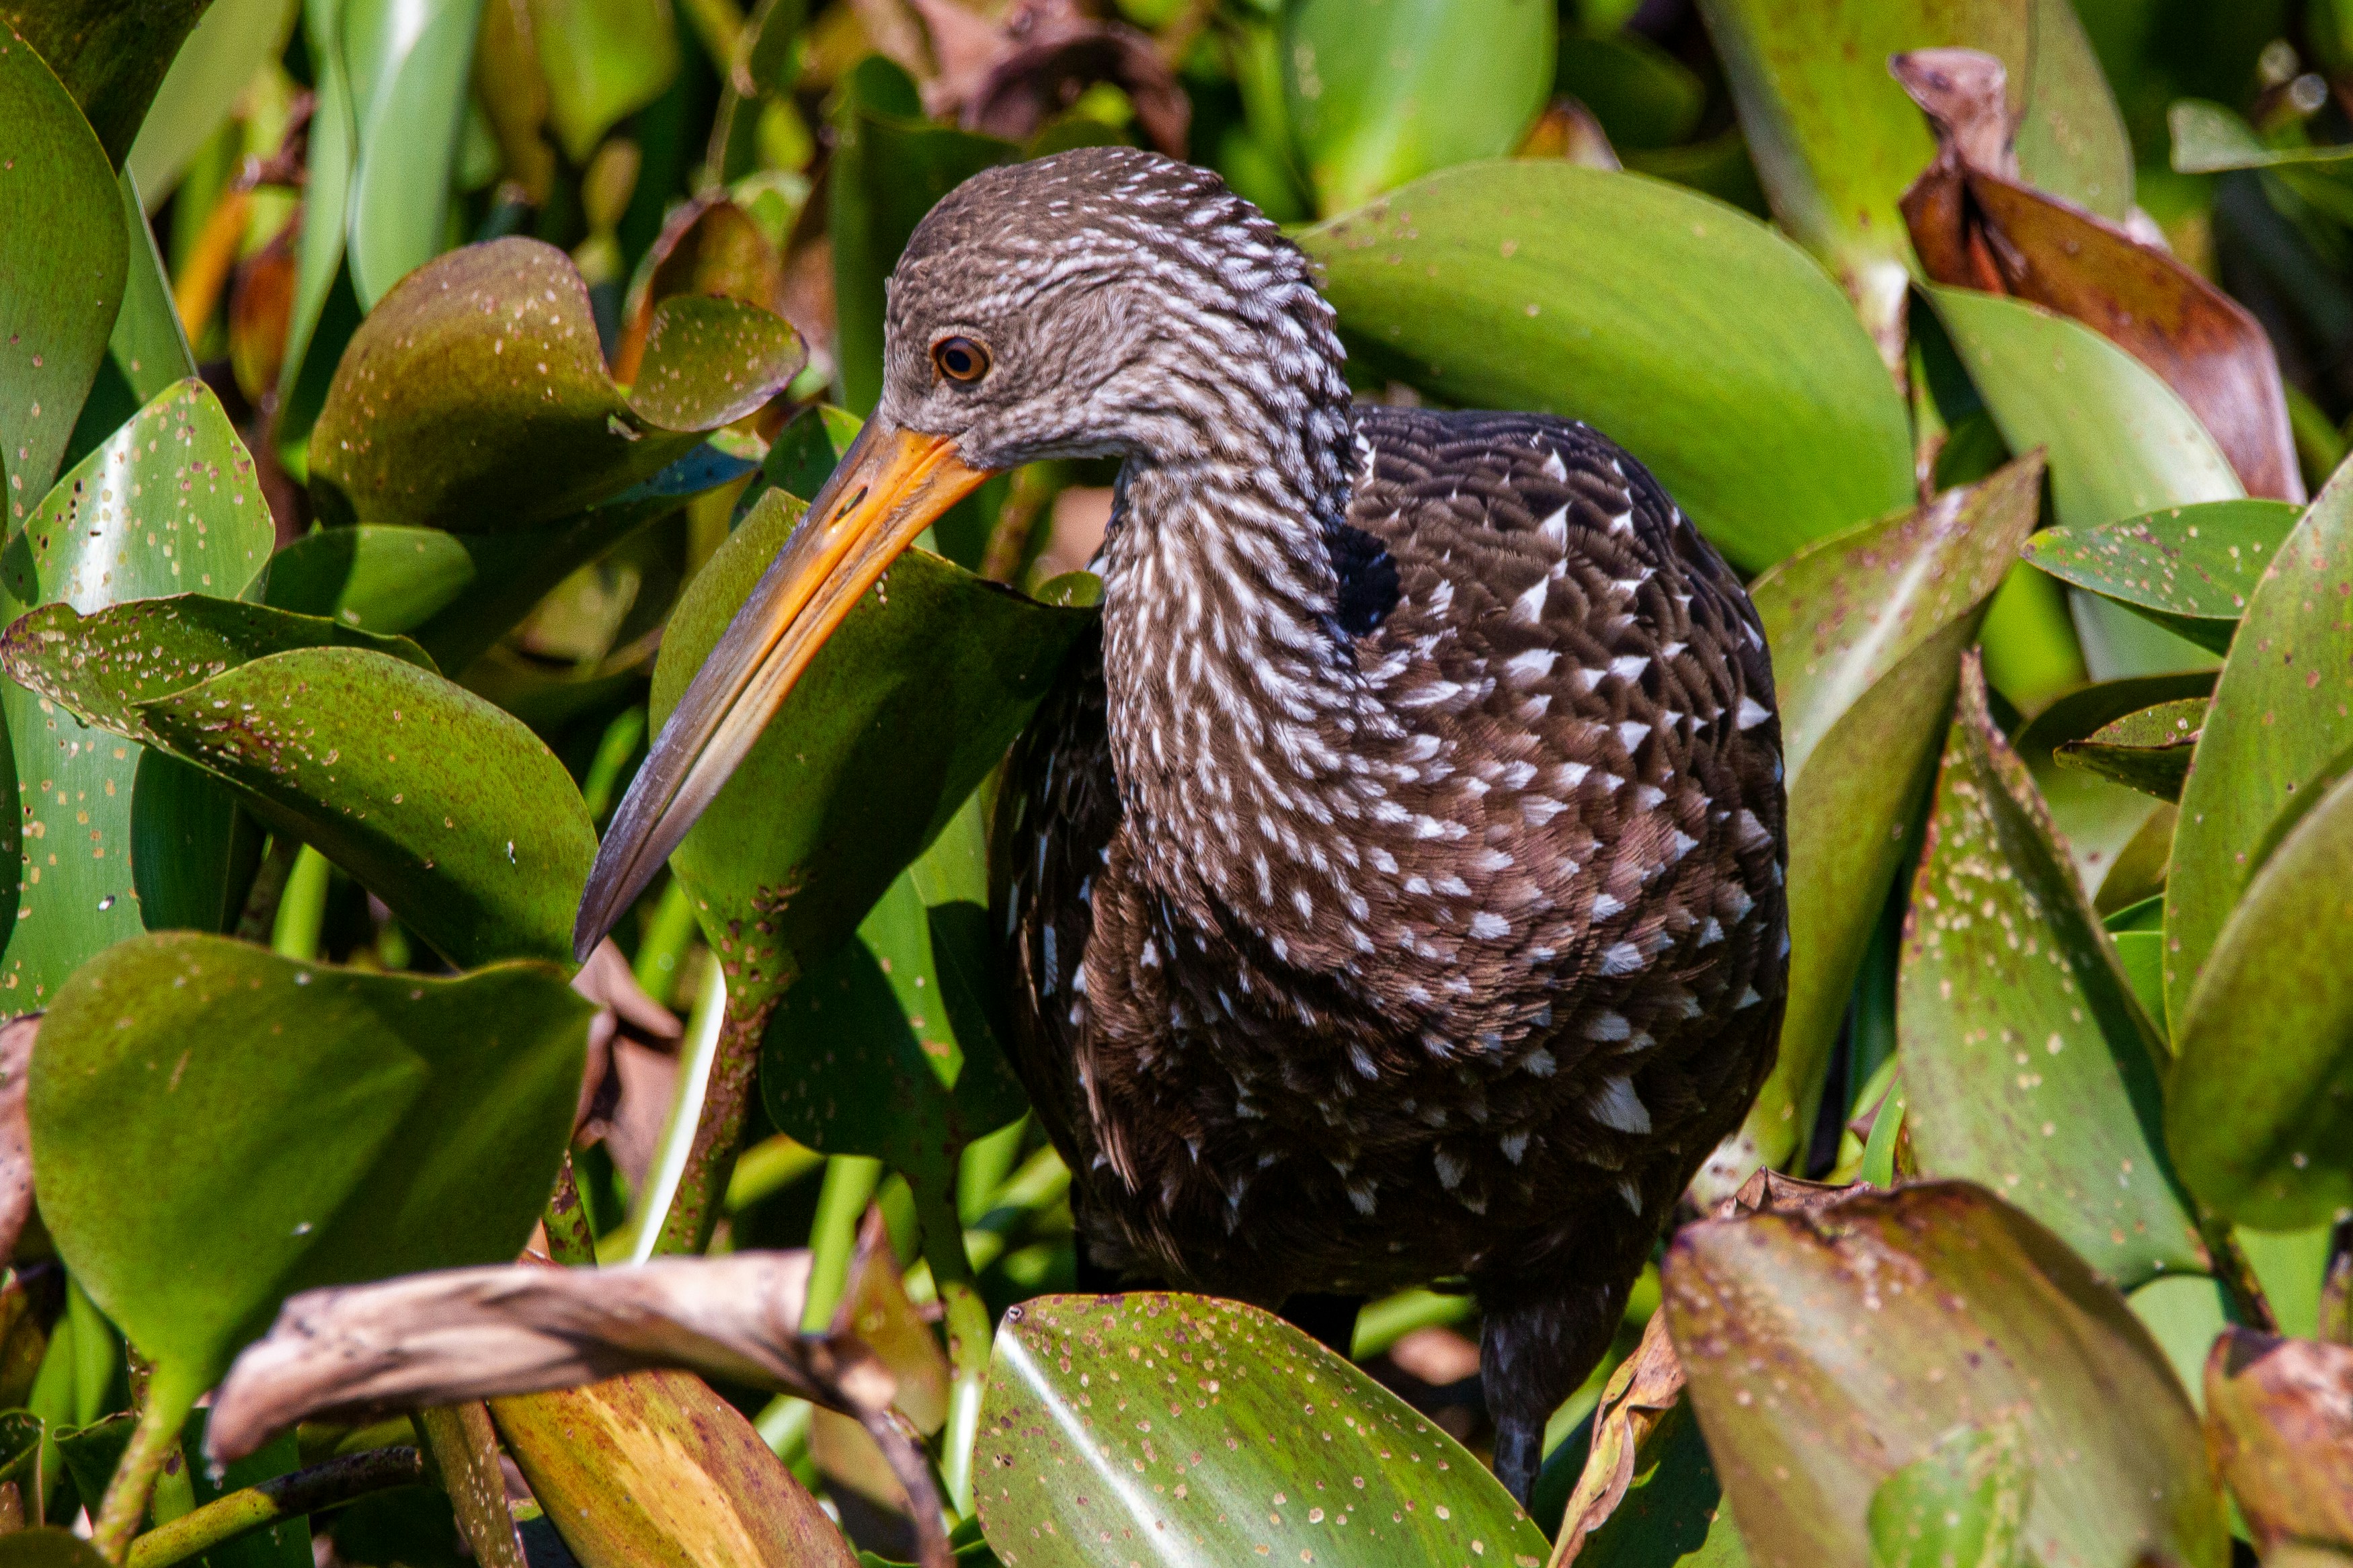 A limpkin in a mass of water hyacinth.